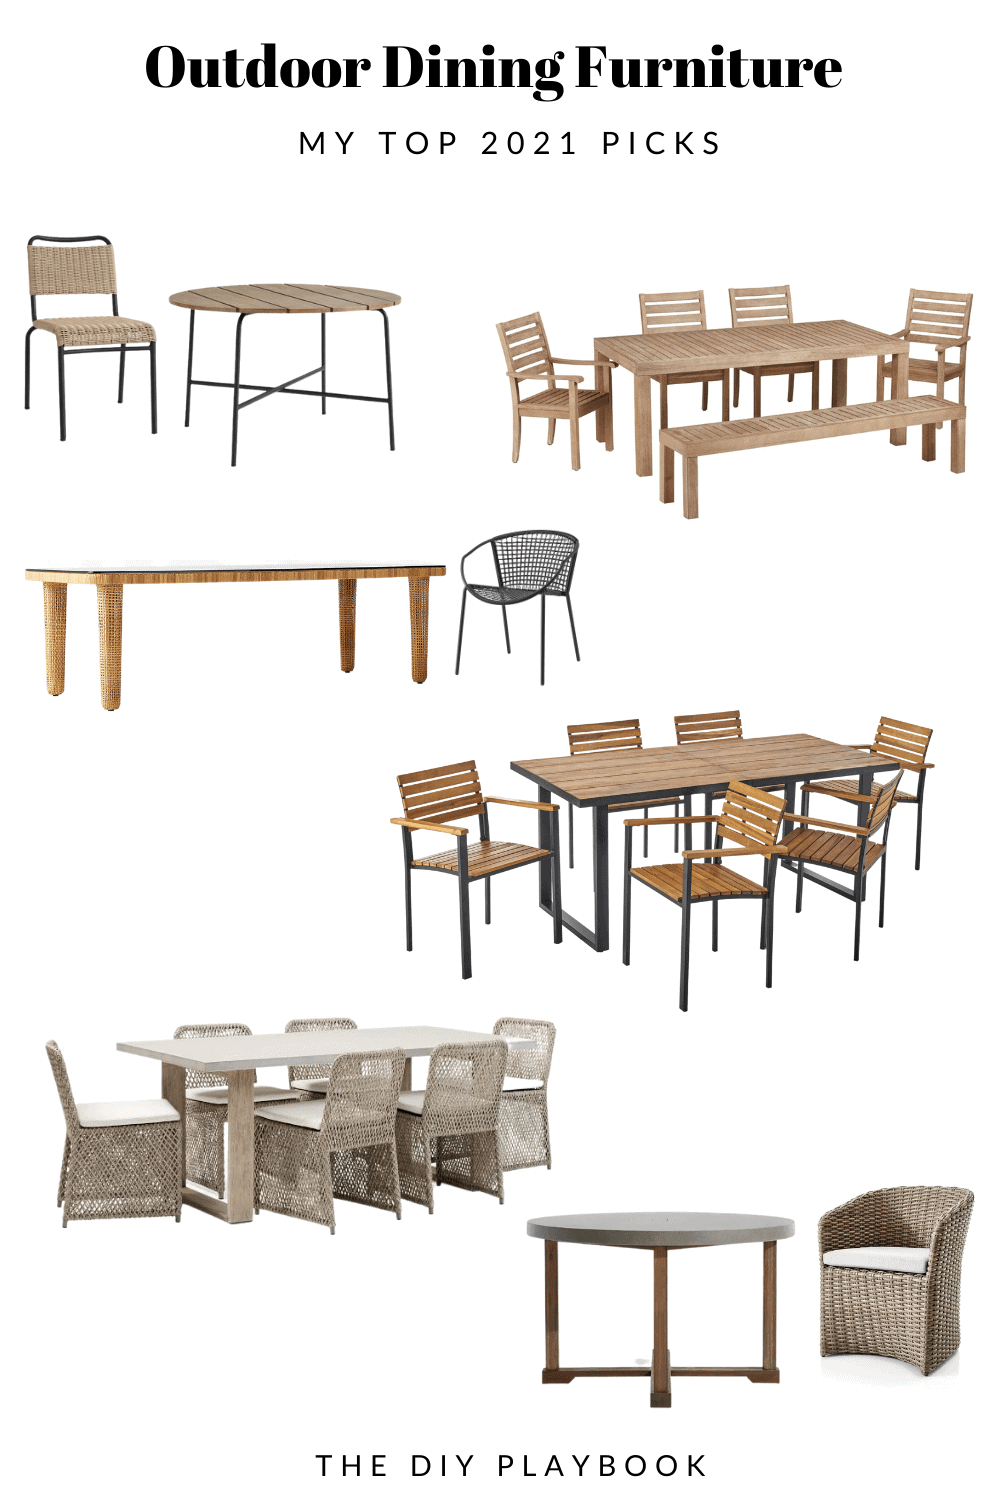 Outdoor patio furniture - my favorite dining seating